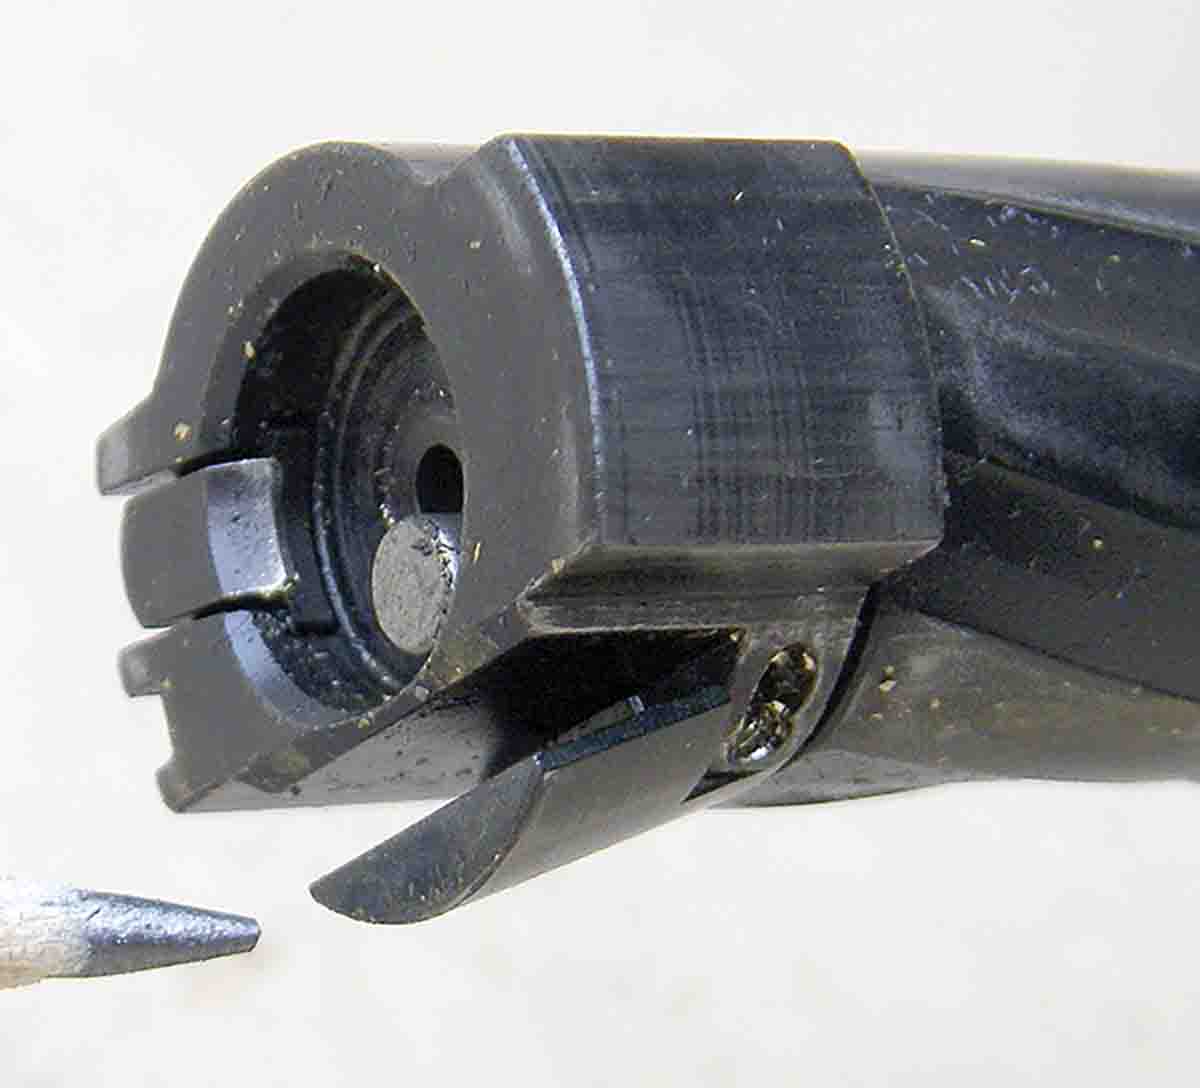 The bolt face is countersunk and features a push-feed system. Note the hinged “cartridge pusher” that strips cartridges from the magazine.